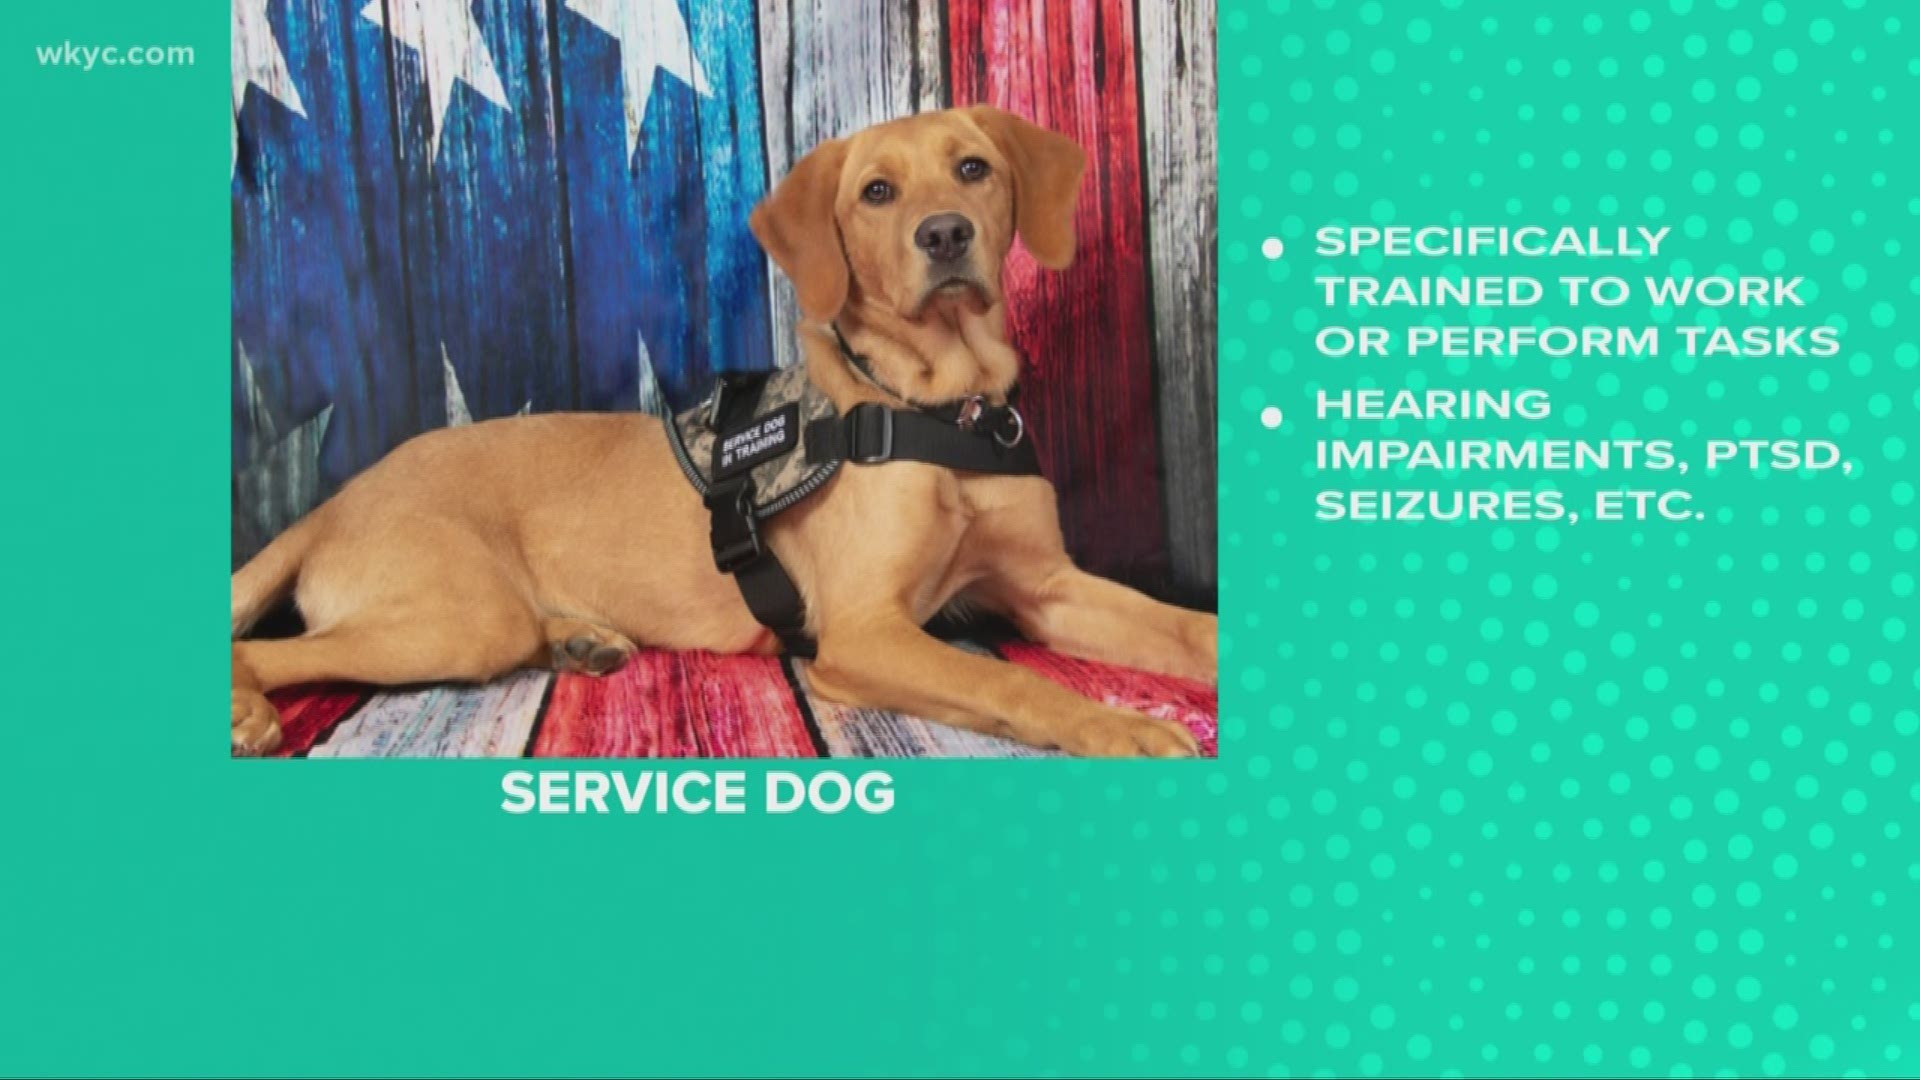 Sept. 24, 2019: You've probably heard of service dogs, therapy dogs and emotional support animals, but do you really know the difference? Roxy helps us understand.